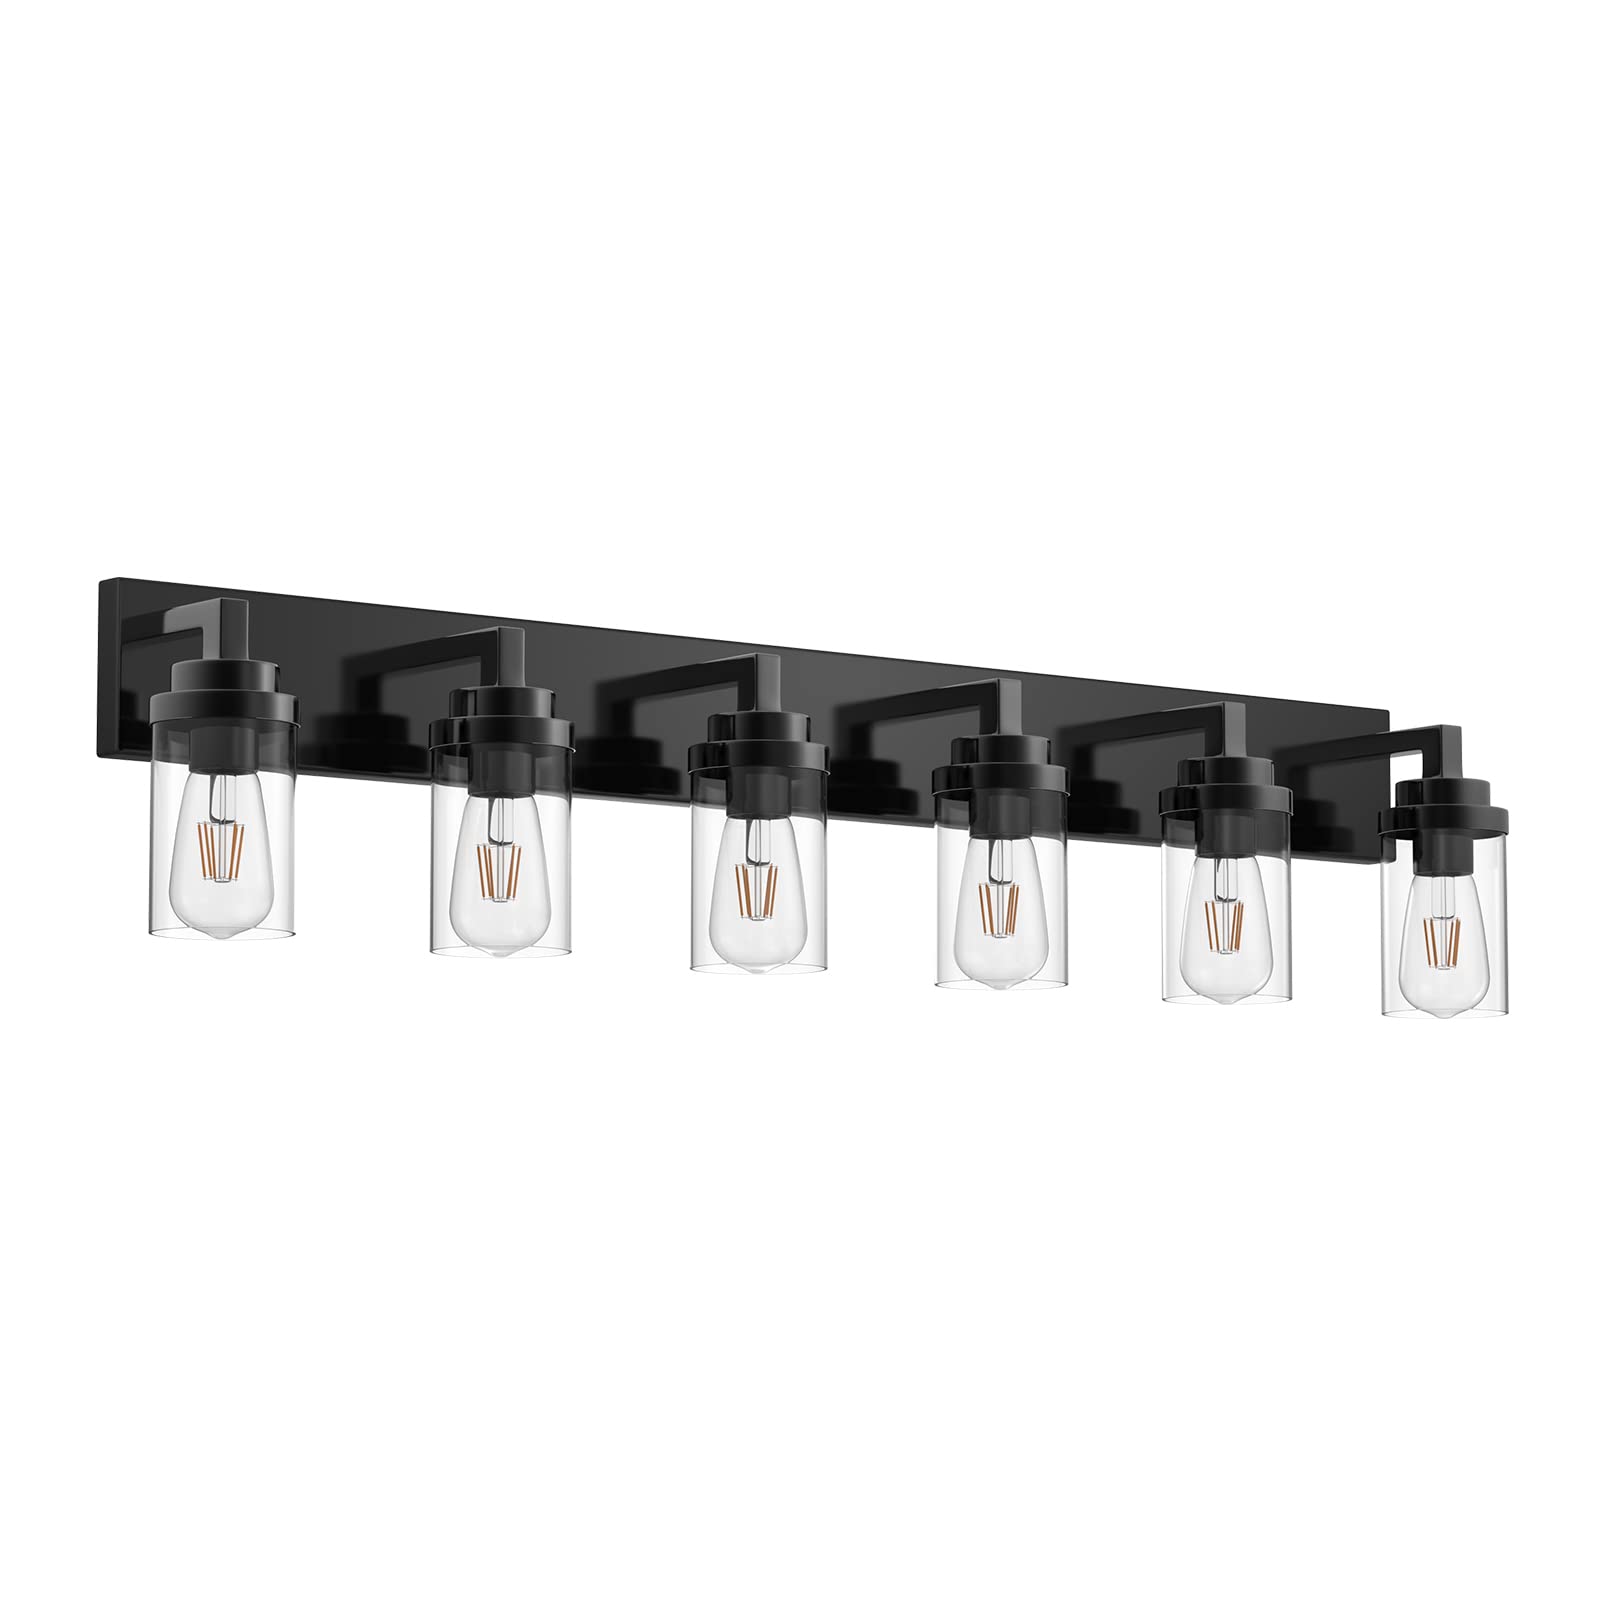 MELUCEE Black Vanity Lights with Clear Glass Shade, 6-Light Modern Bathroom Lighting Fixtures Over Mirror Industrial Wall Mount Light Fixture for P...